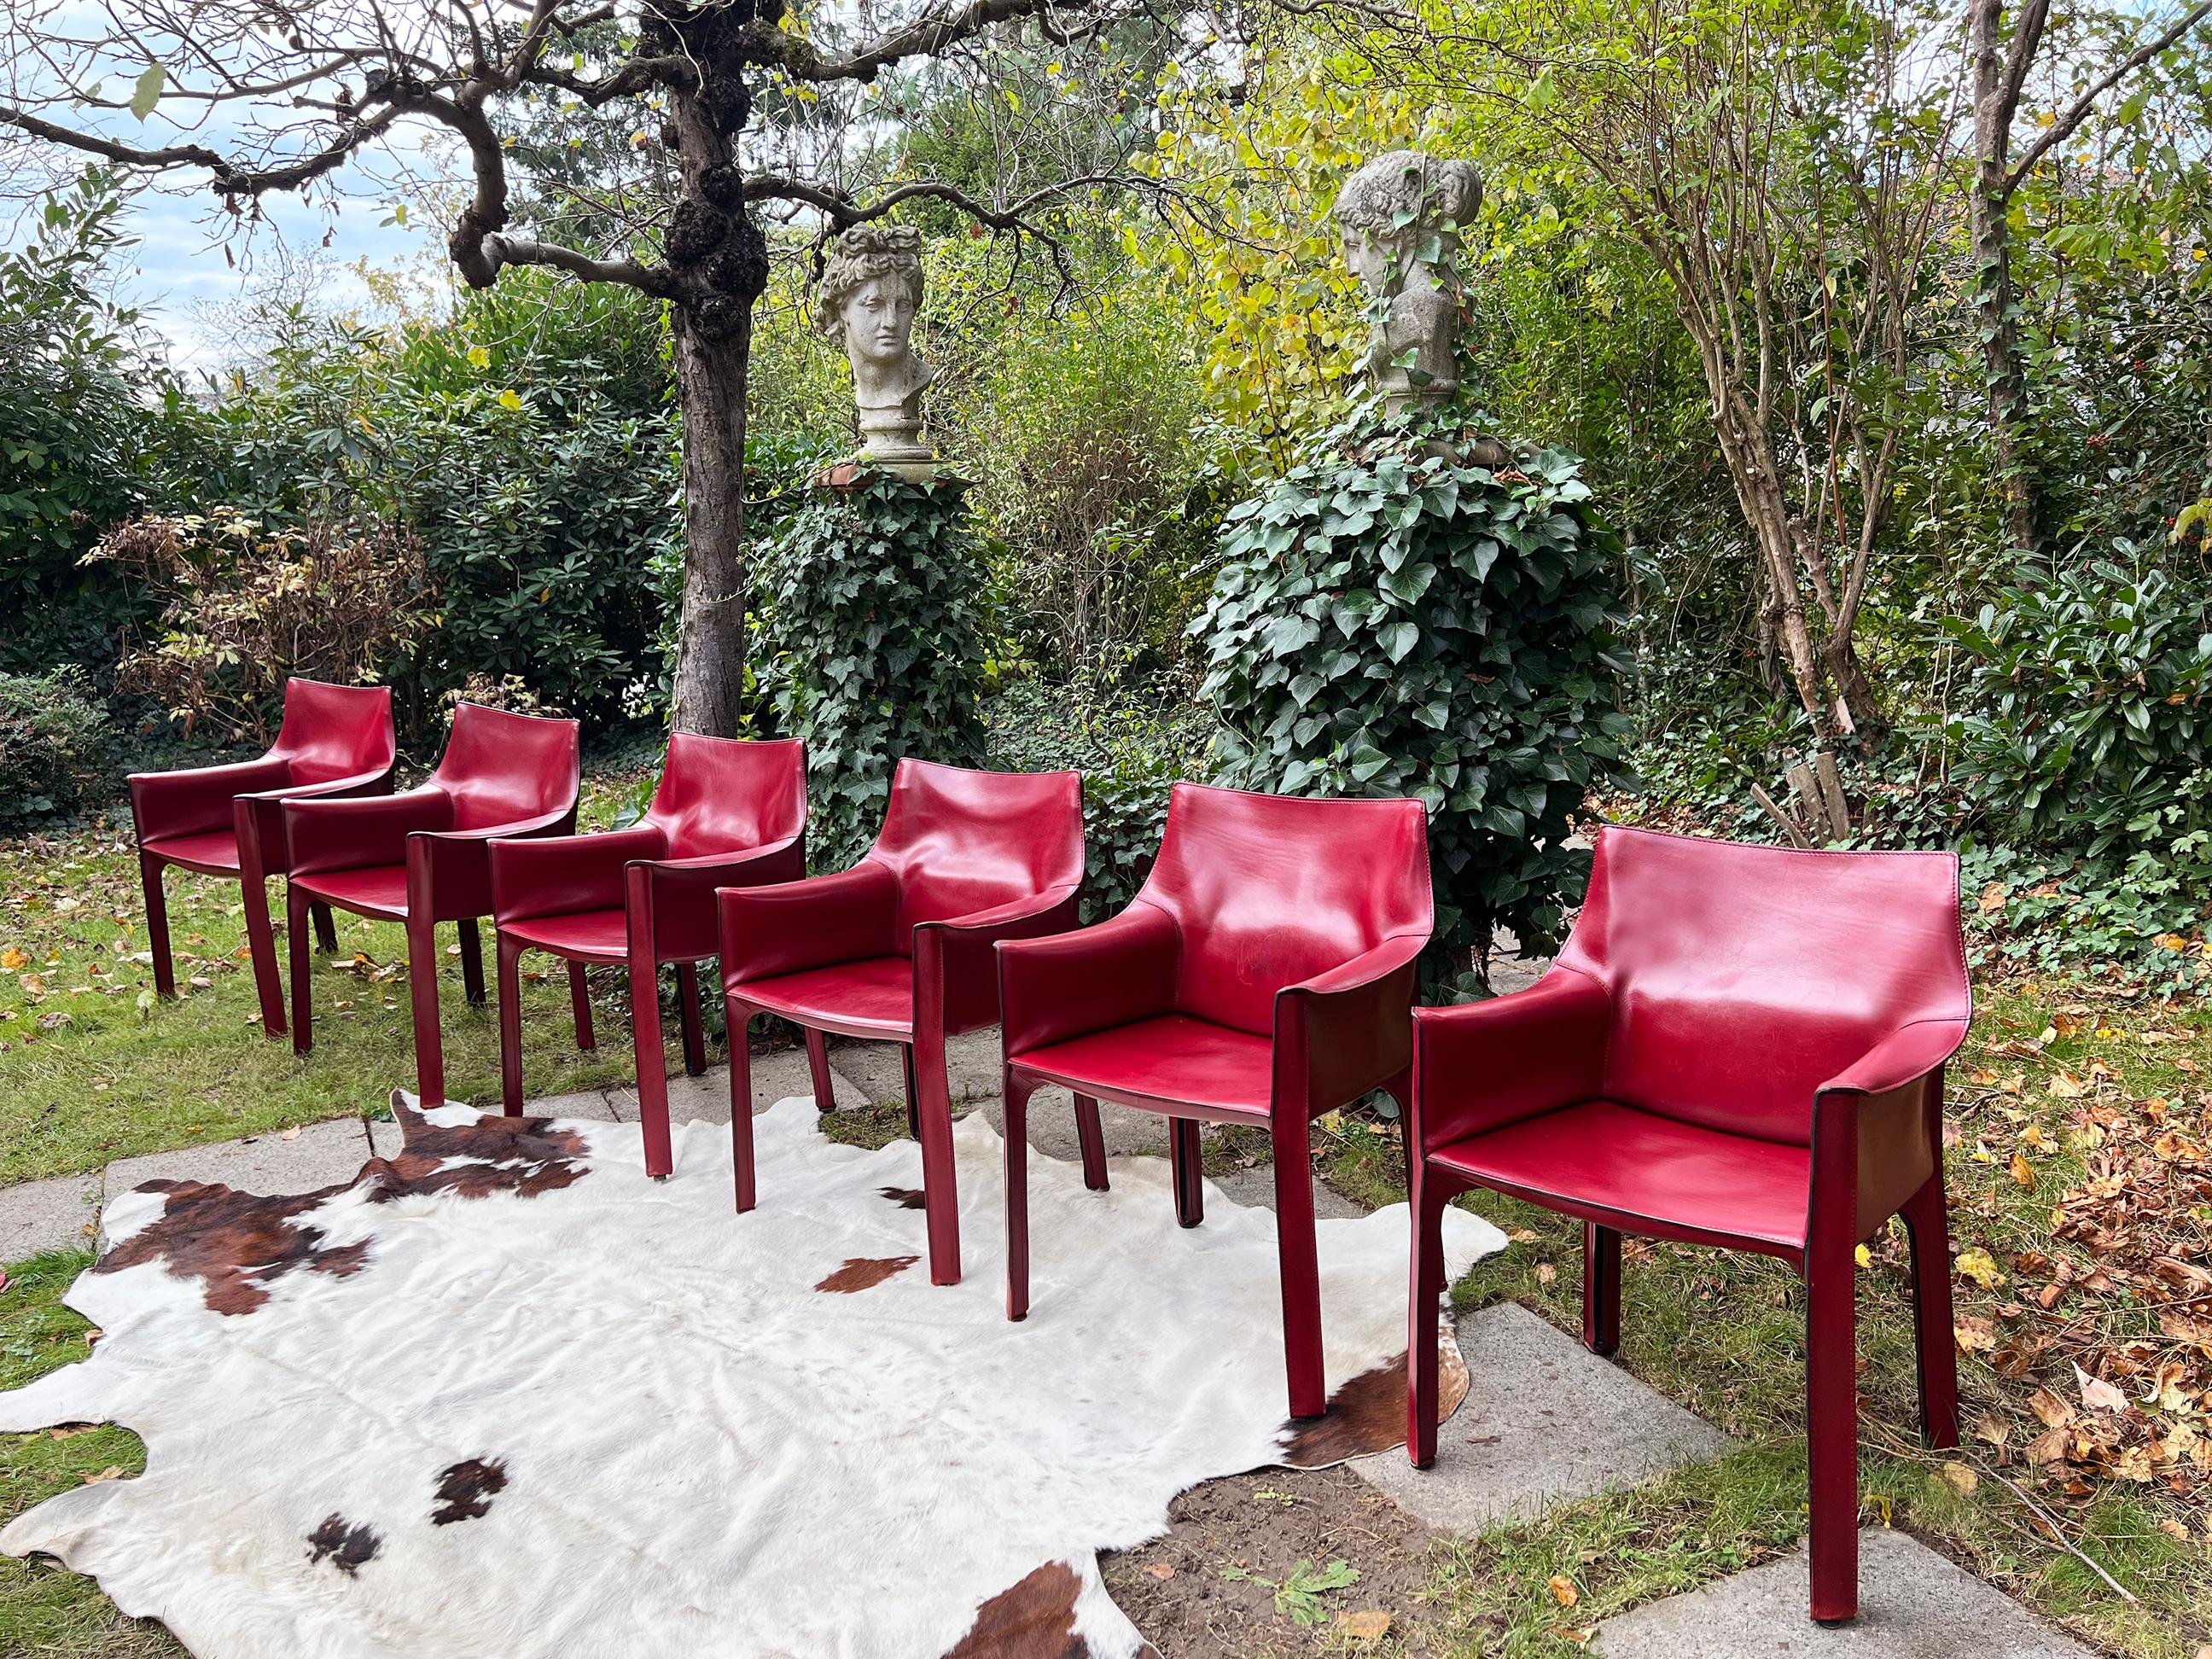 Fabulous, RARE set of 6 original Mario Bellini for Cassina 414 Cab Armchairs!
Complete set, in beautiful leather.

Worldwide custom shipping available--We will custom package and ship these chairs via airmail to your door, insured, requiring